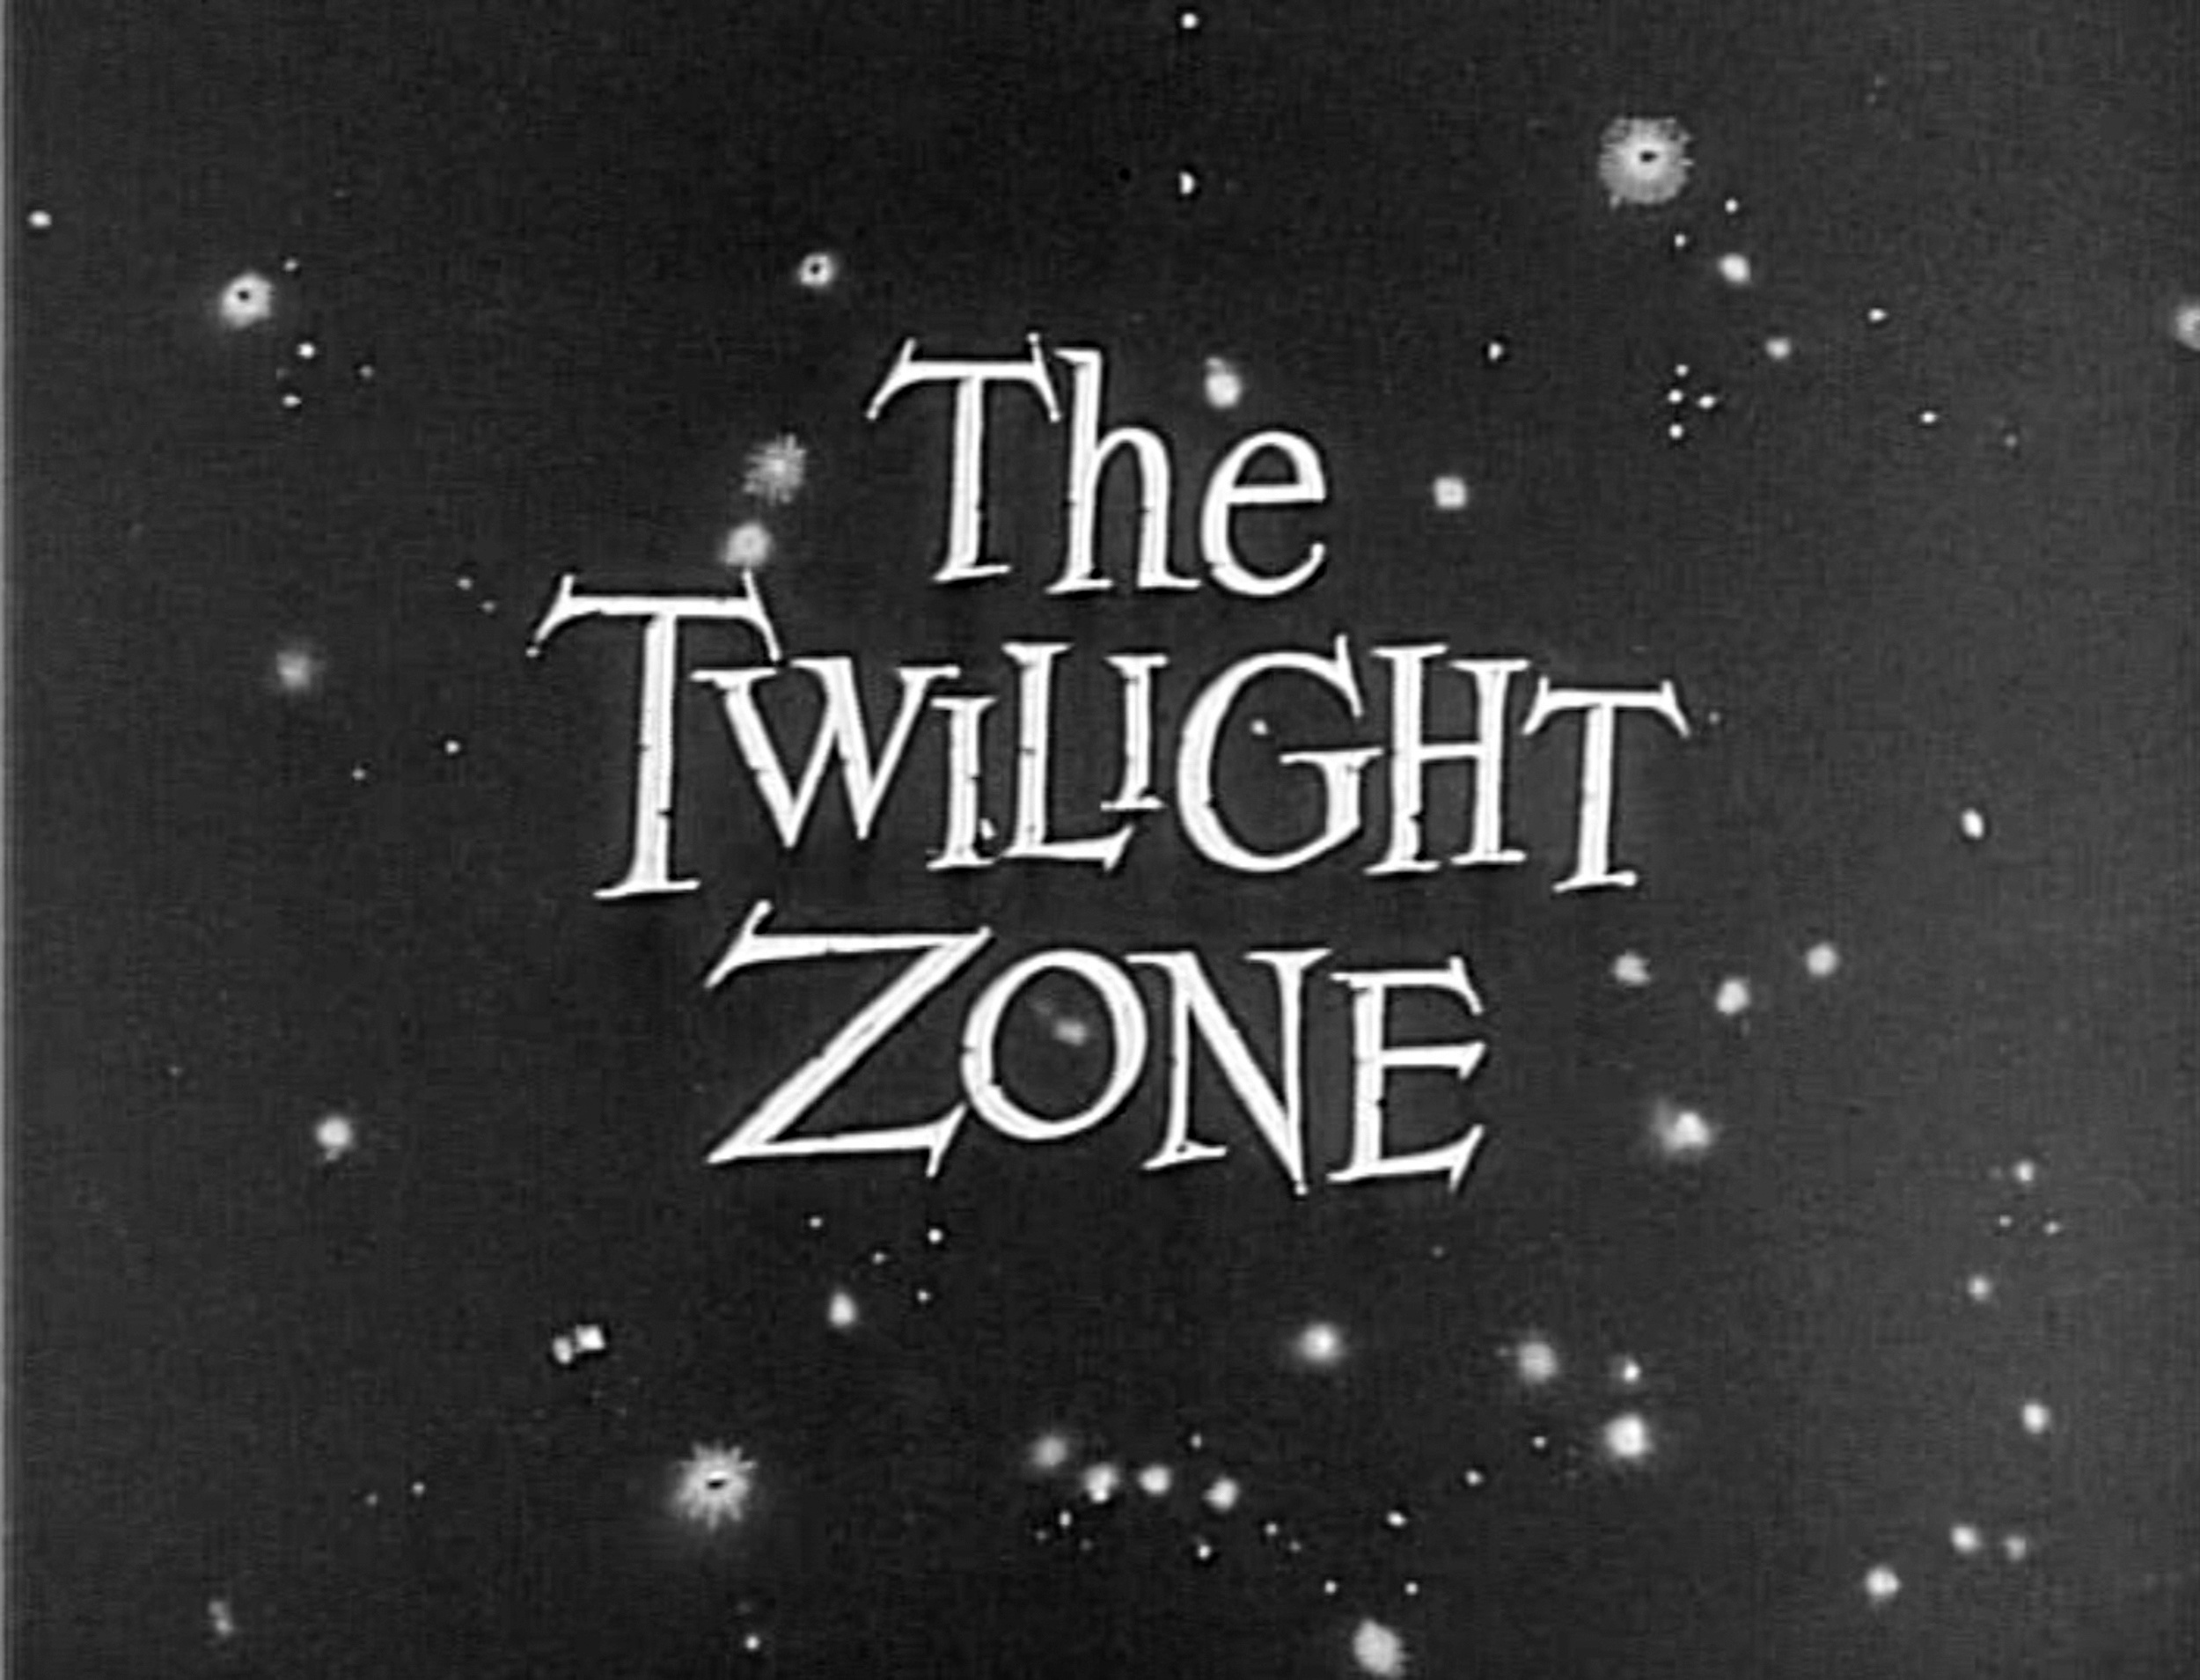 The opening of 'The Twilight Zone' 